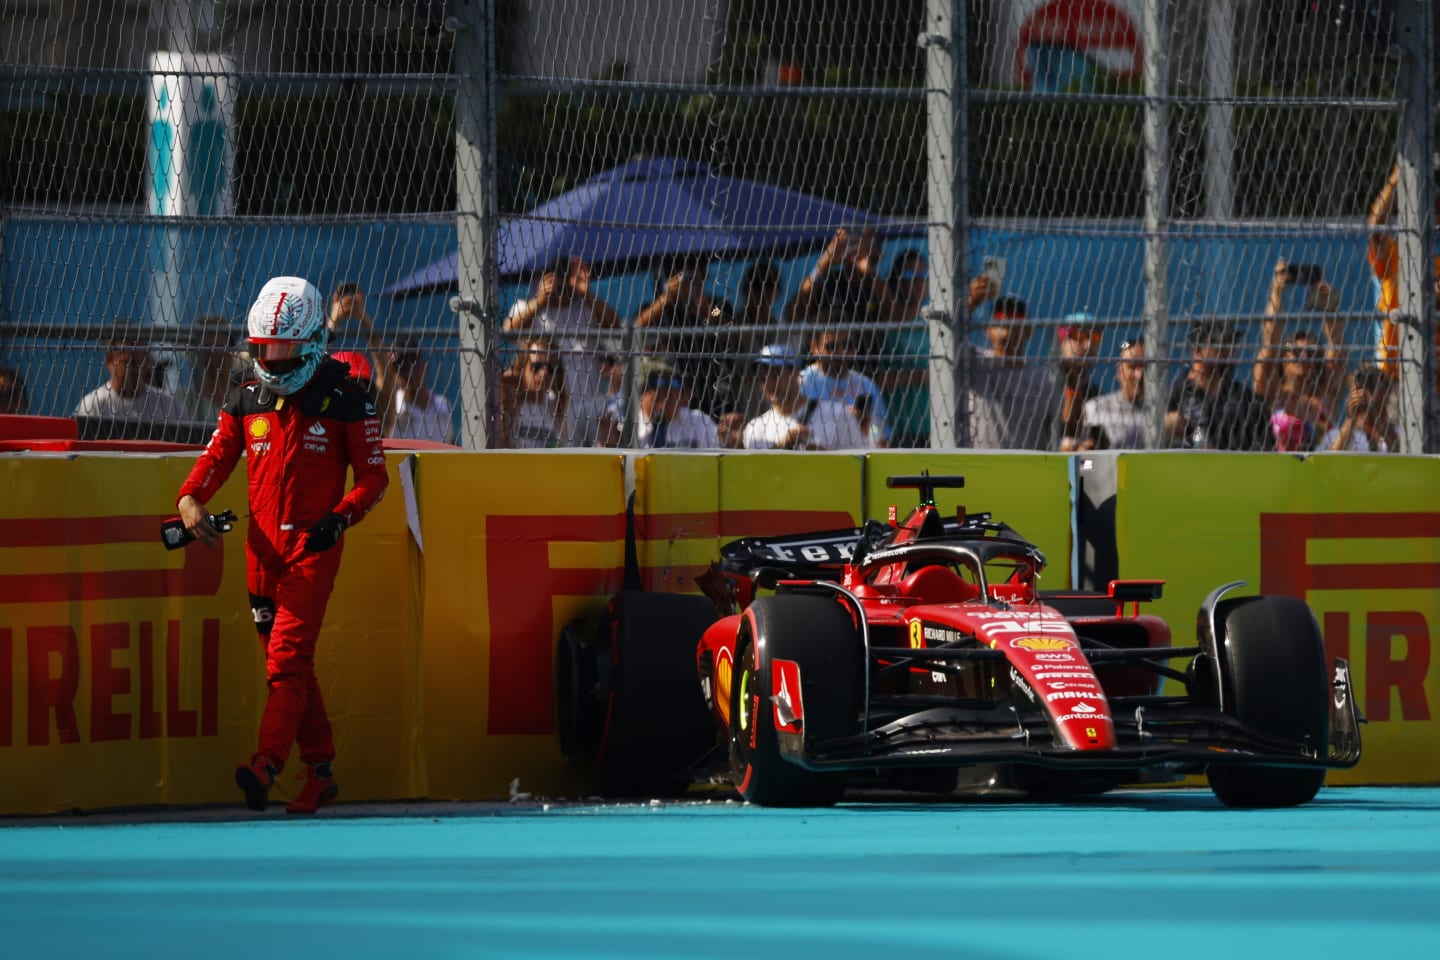 MIAMI, FLORIDA - MAY 06: Charles Leclerc of Monaco and Ferrari walks from his car after crashing during qualifying ahead of the F1 Grand Prix of Miami at Miami International Autodrome on May 06, 2023 in Miami, Florida. (Photo by Jared C. Tilton/Getty Images)